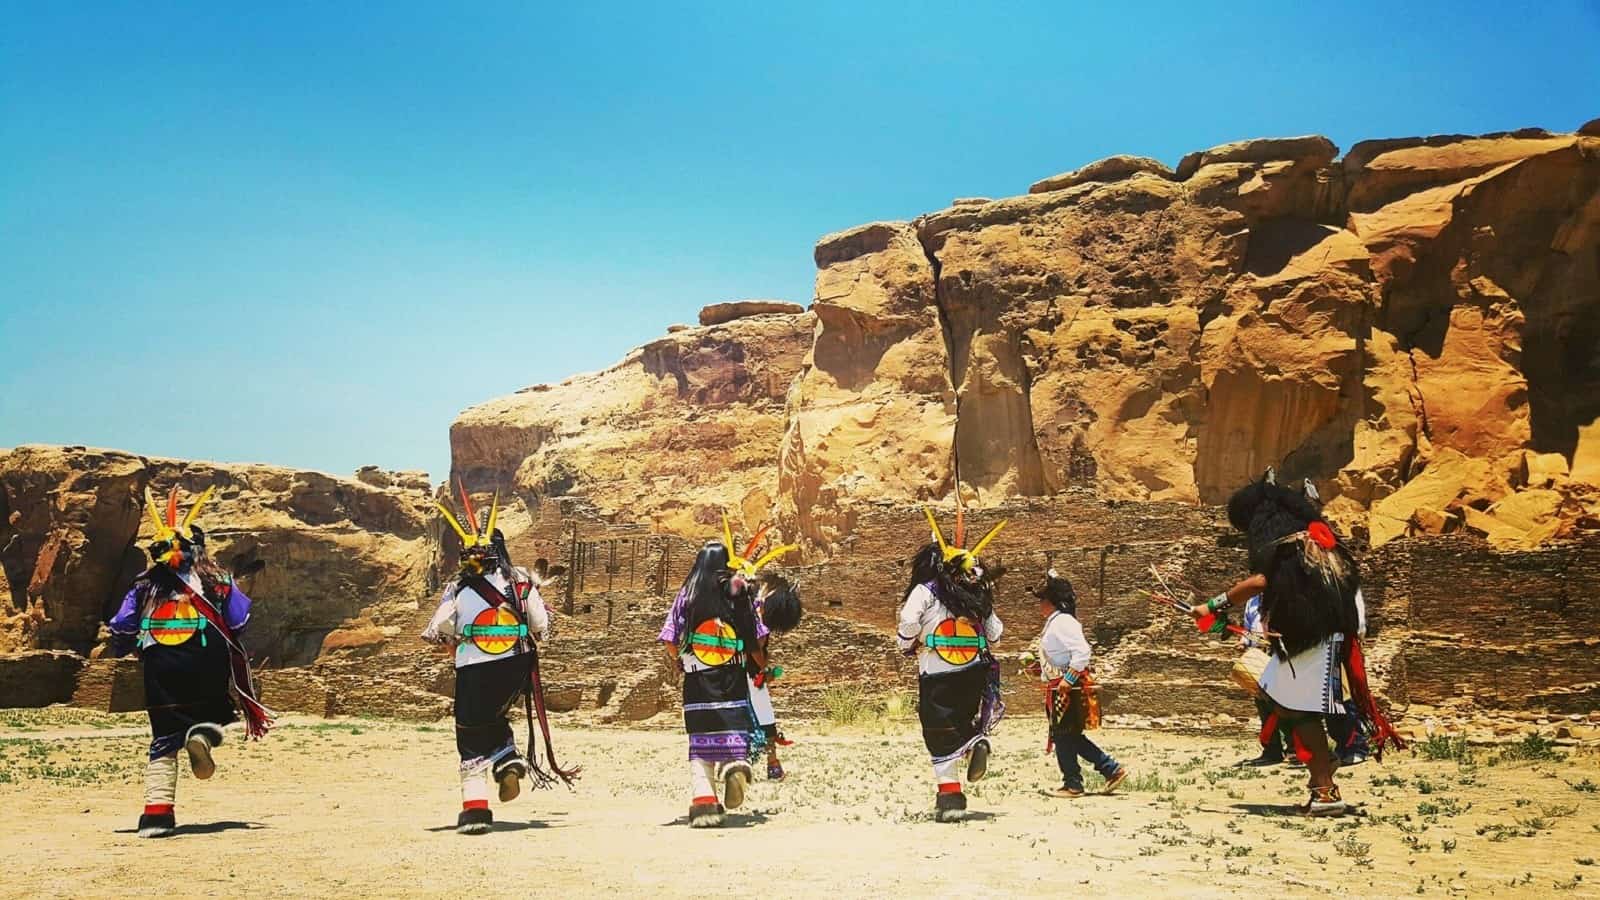 Summer Solstice Dancers at Chaco Canyon